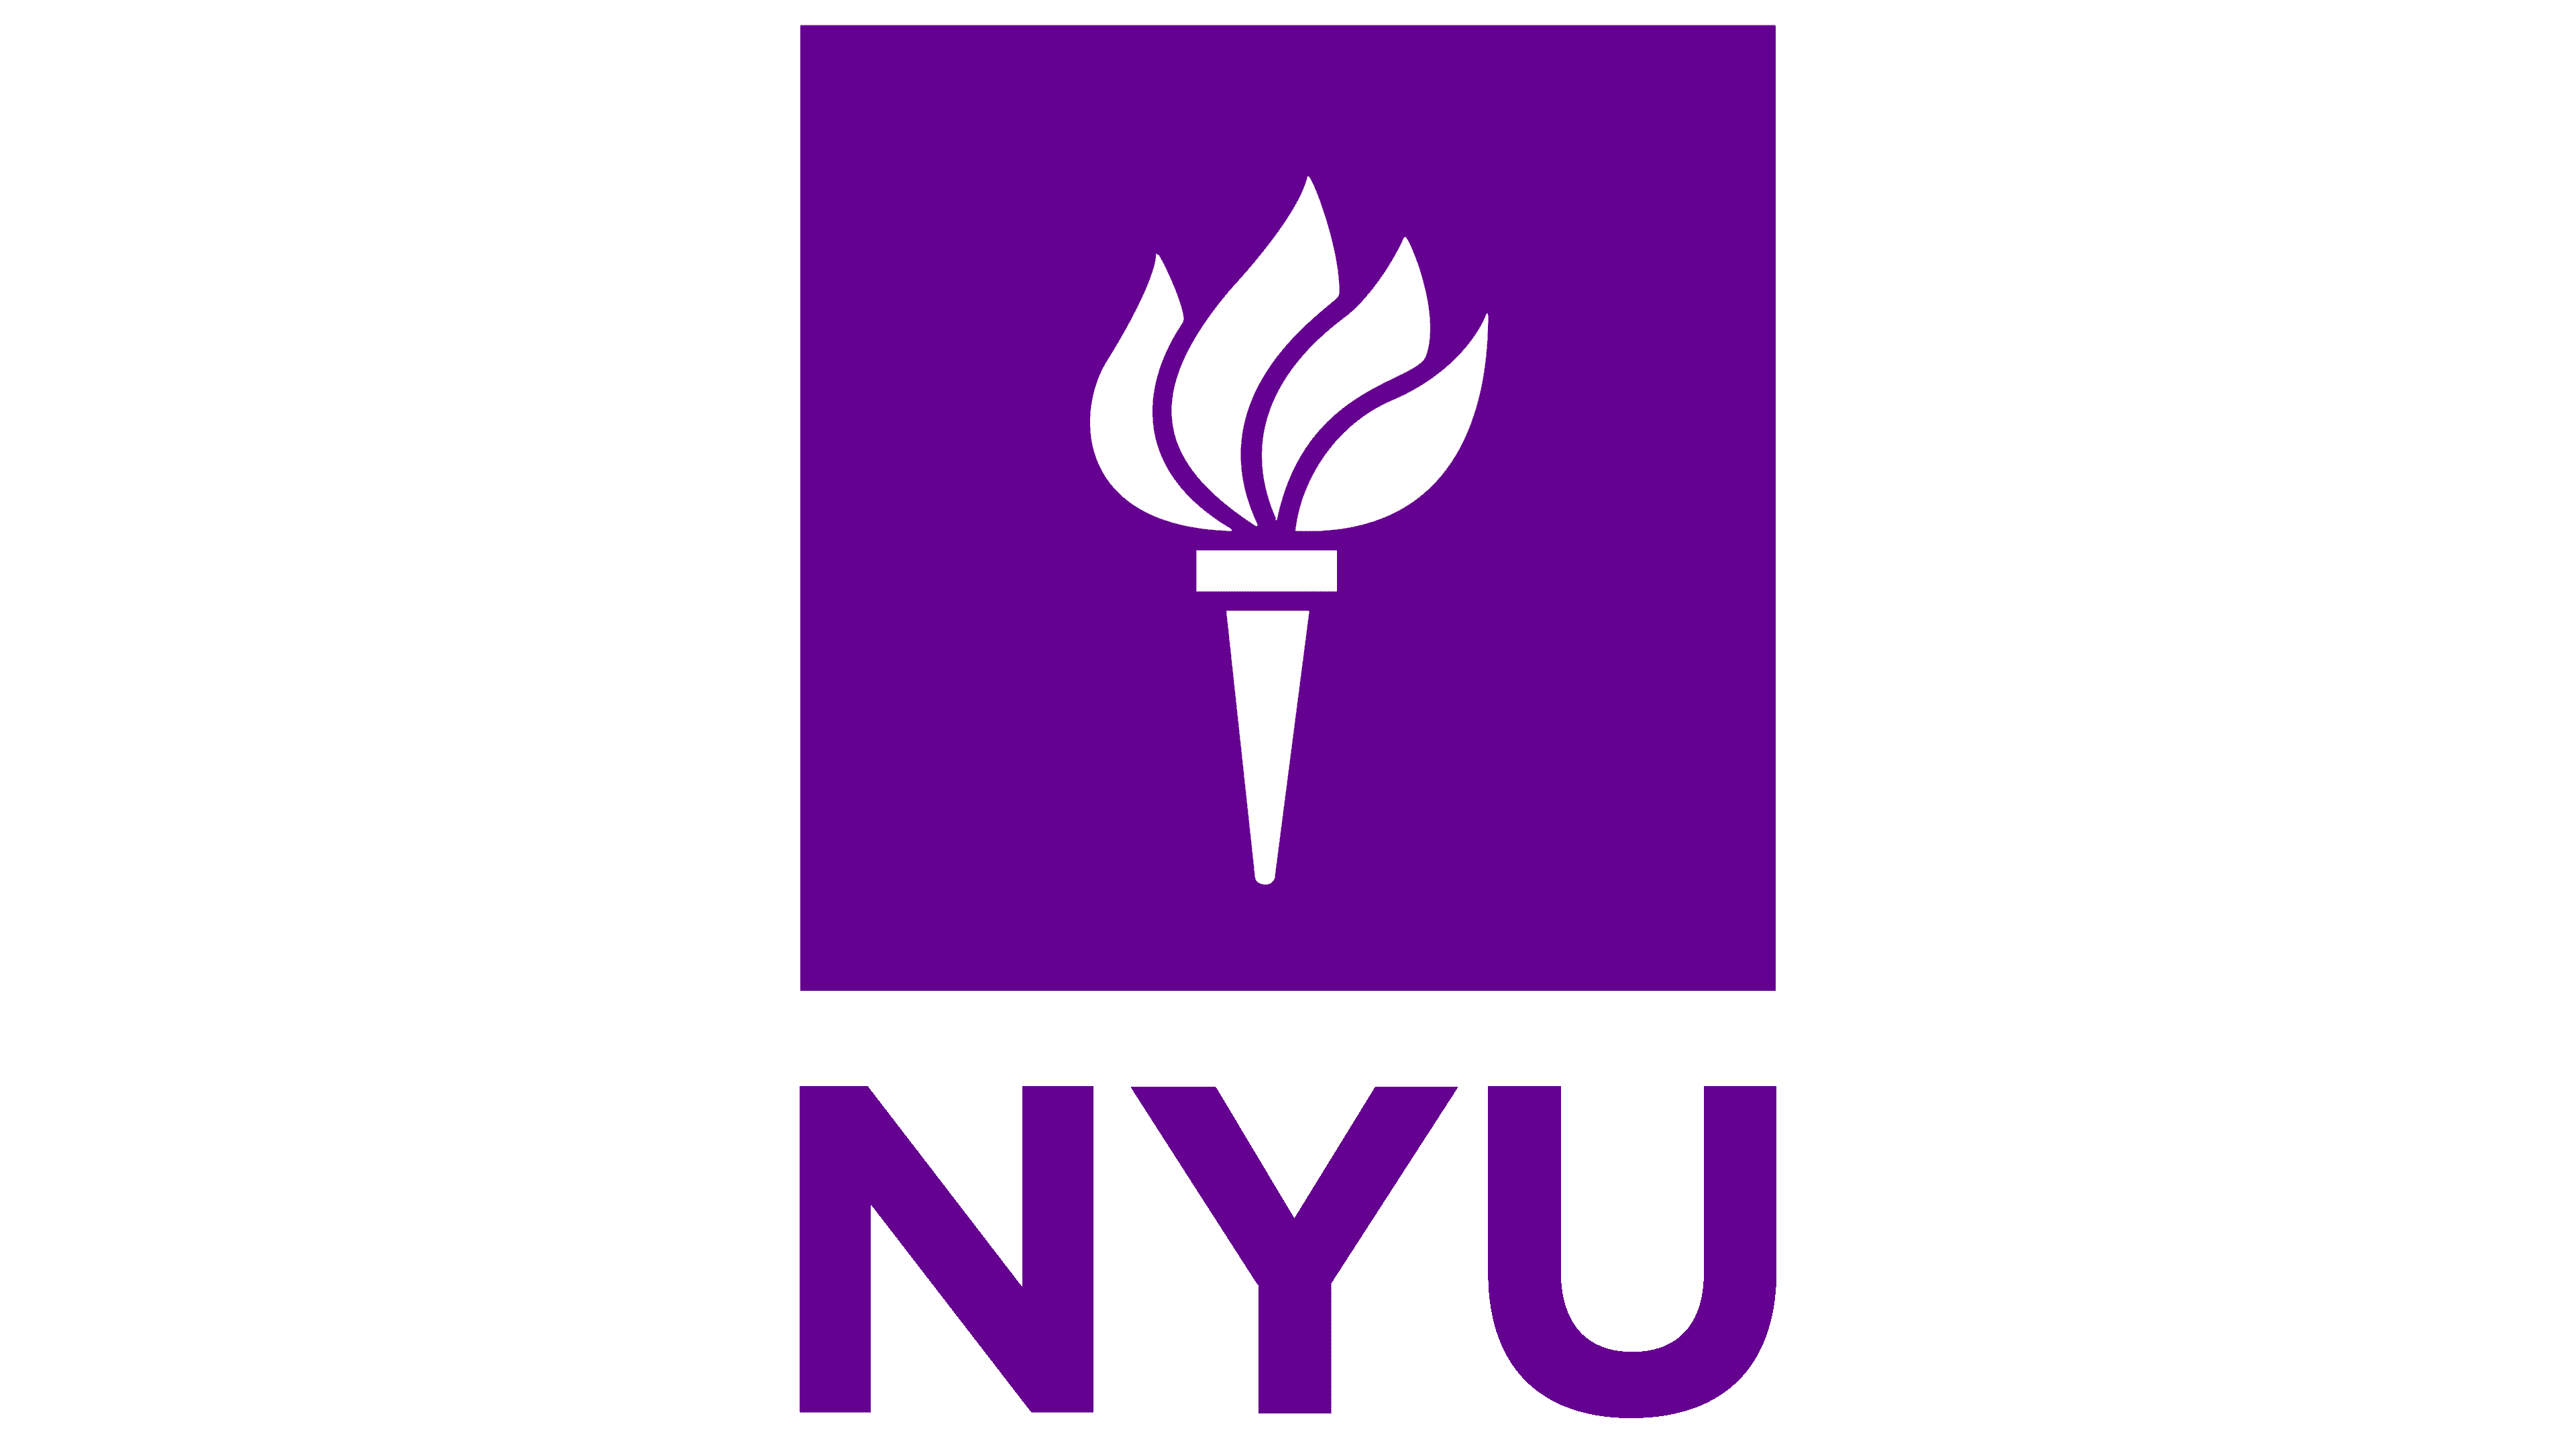 online tutoring helped students get admission into NYU